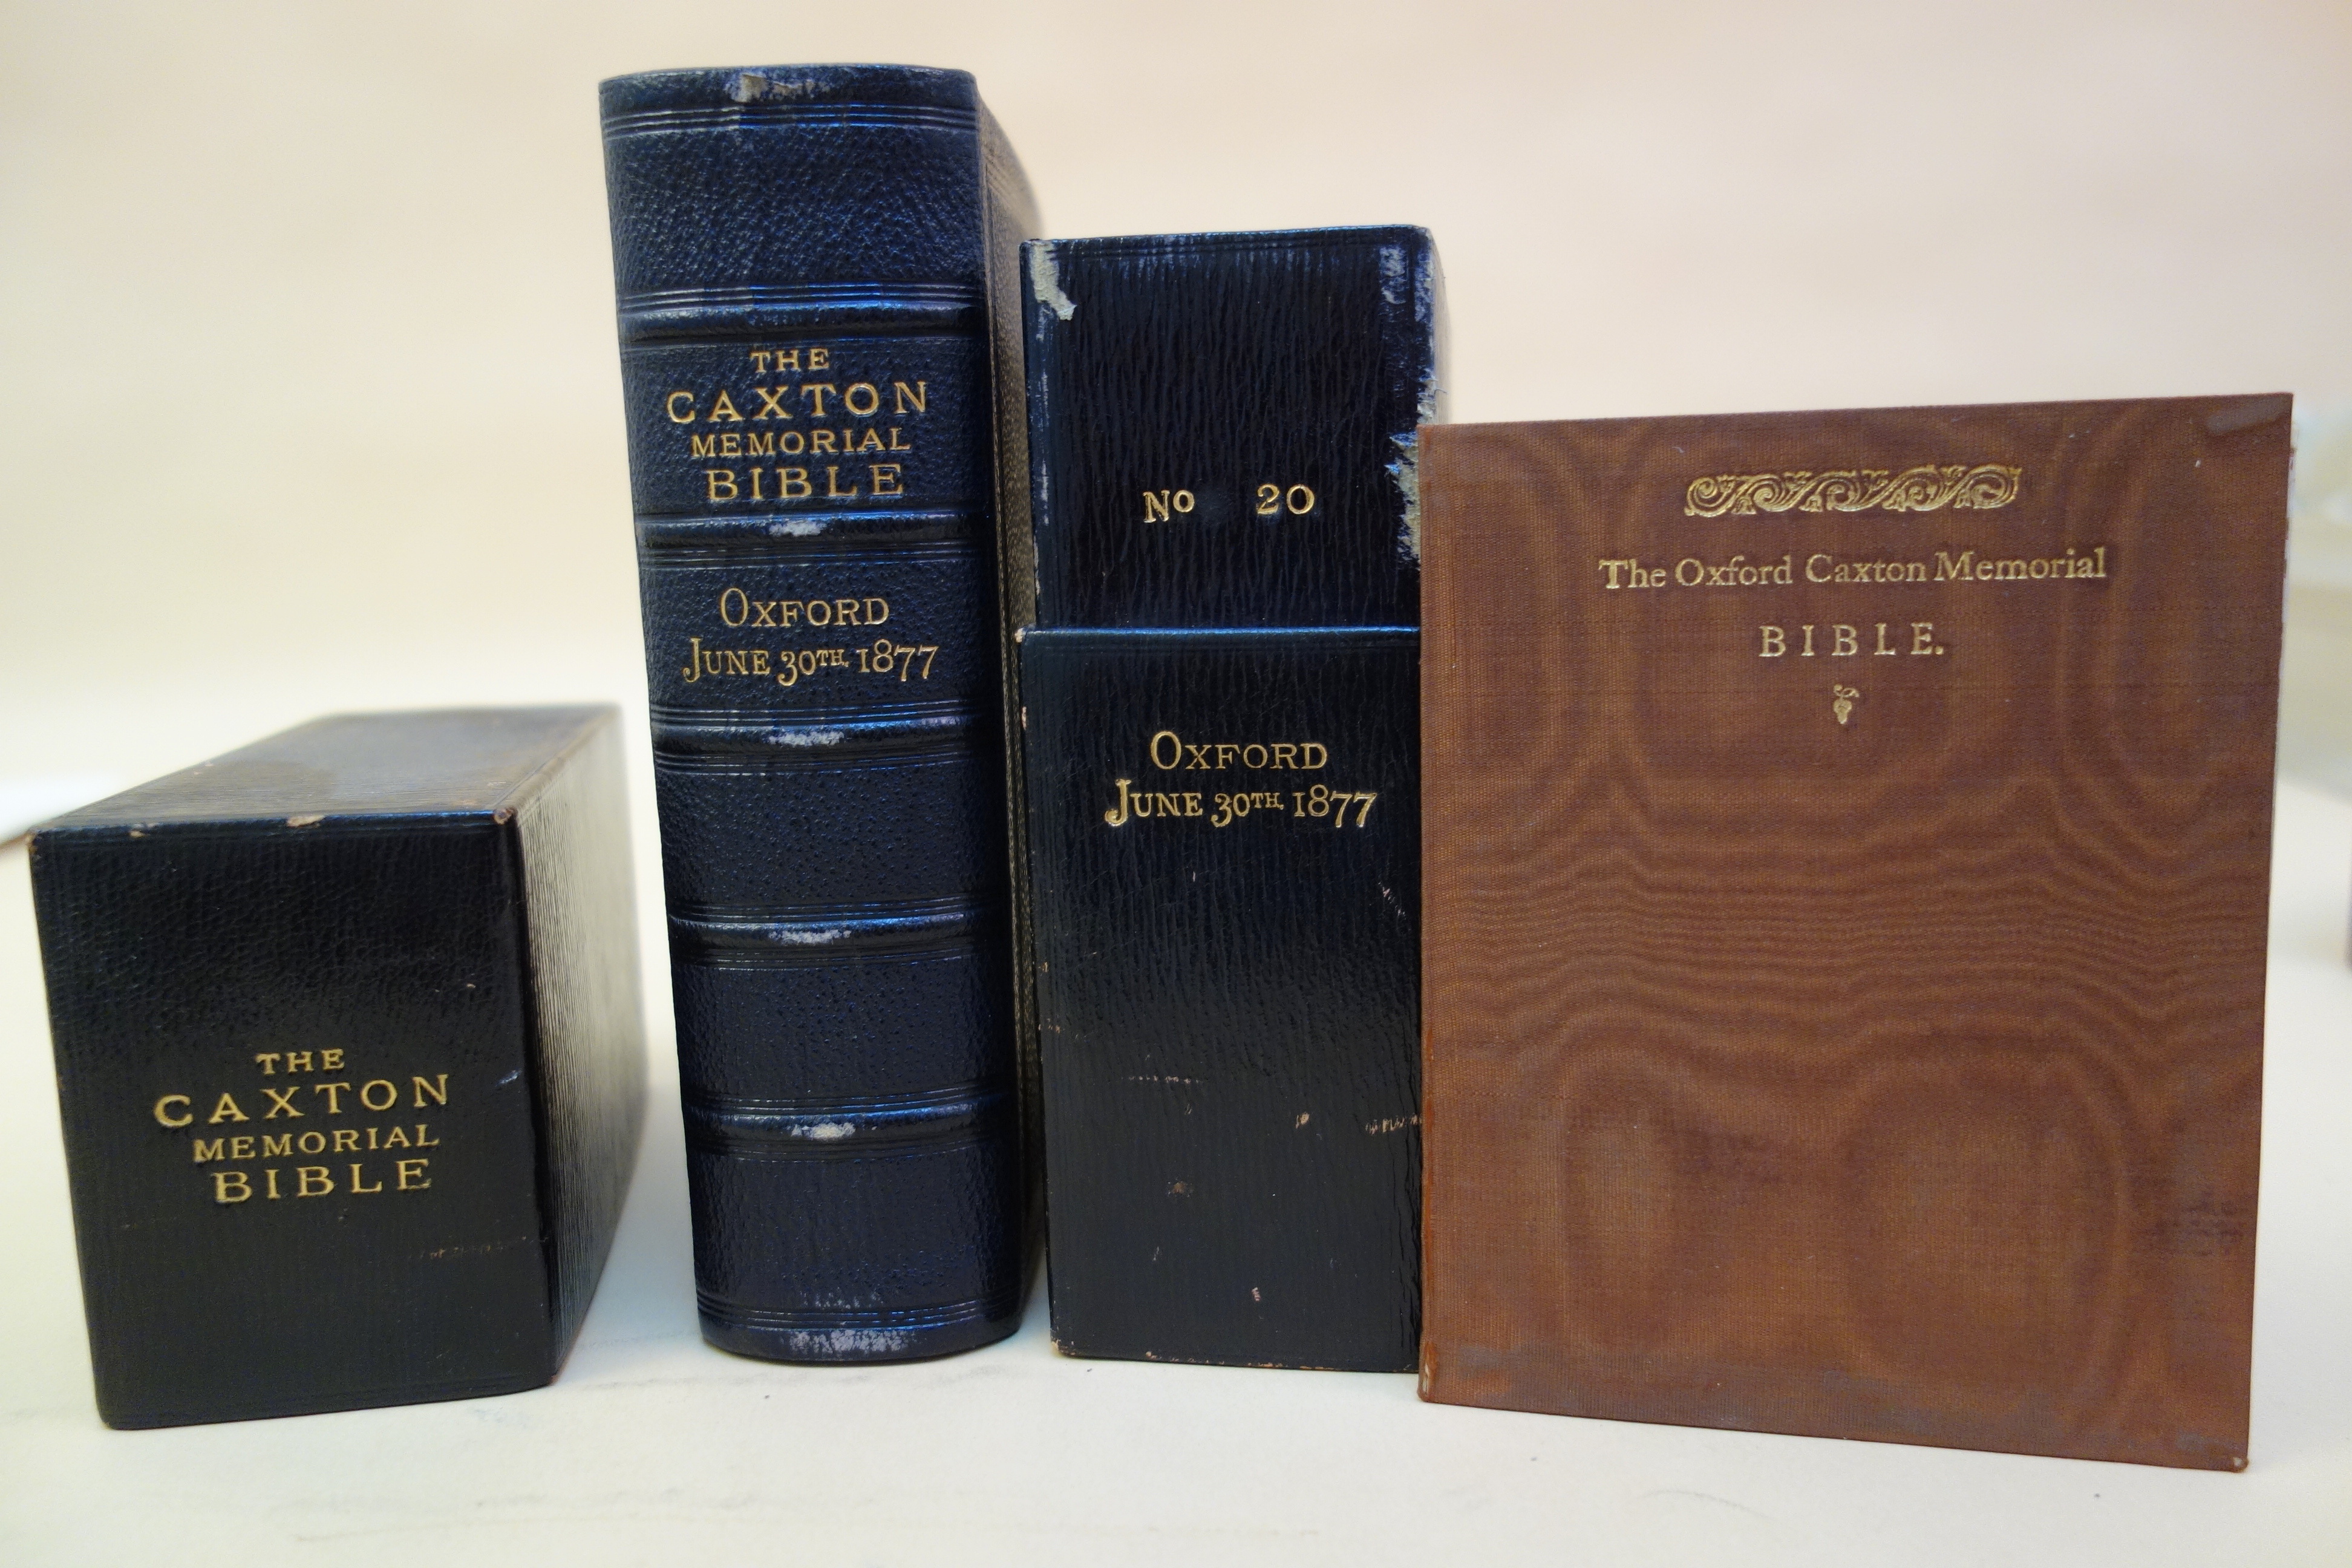 The Caxton Memorial Bible, its slipcase and the india paper version of Henry Stevens